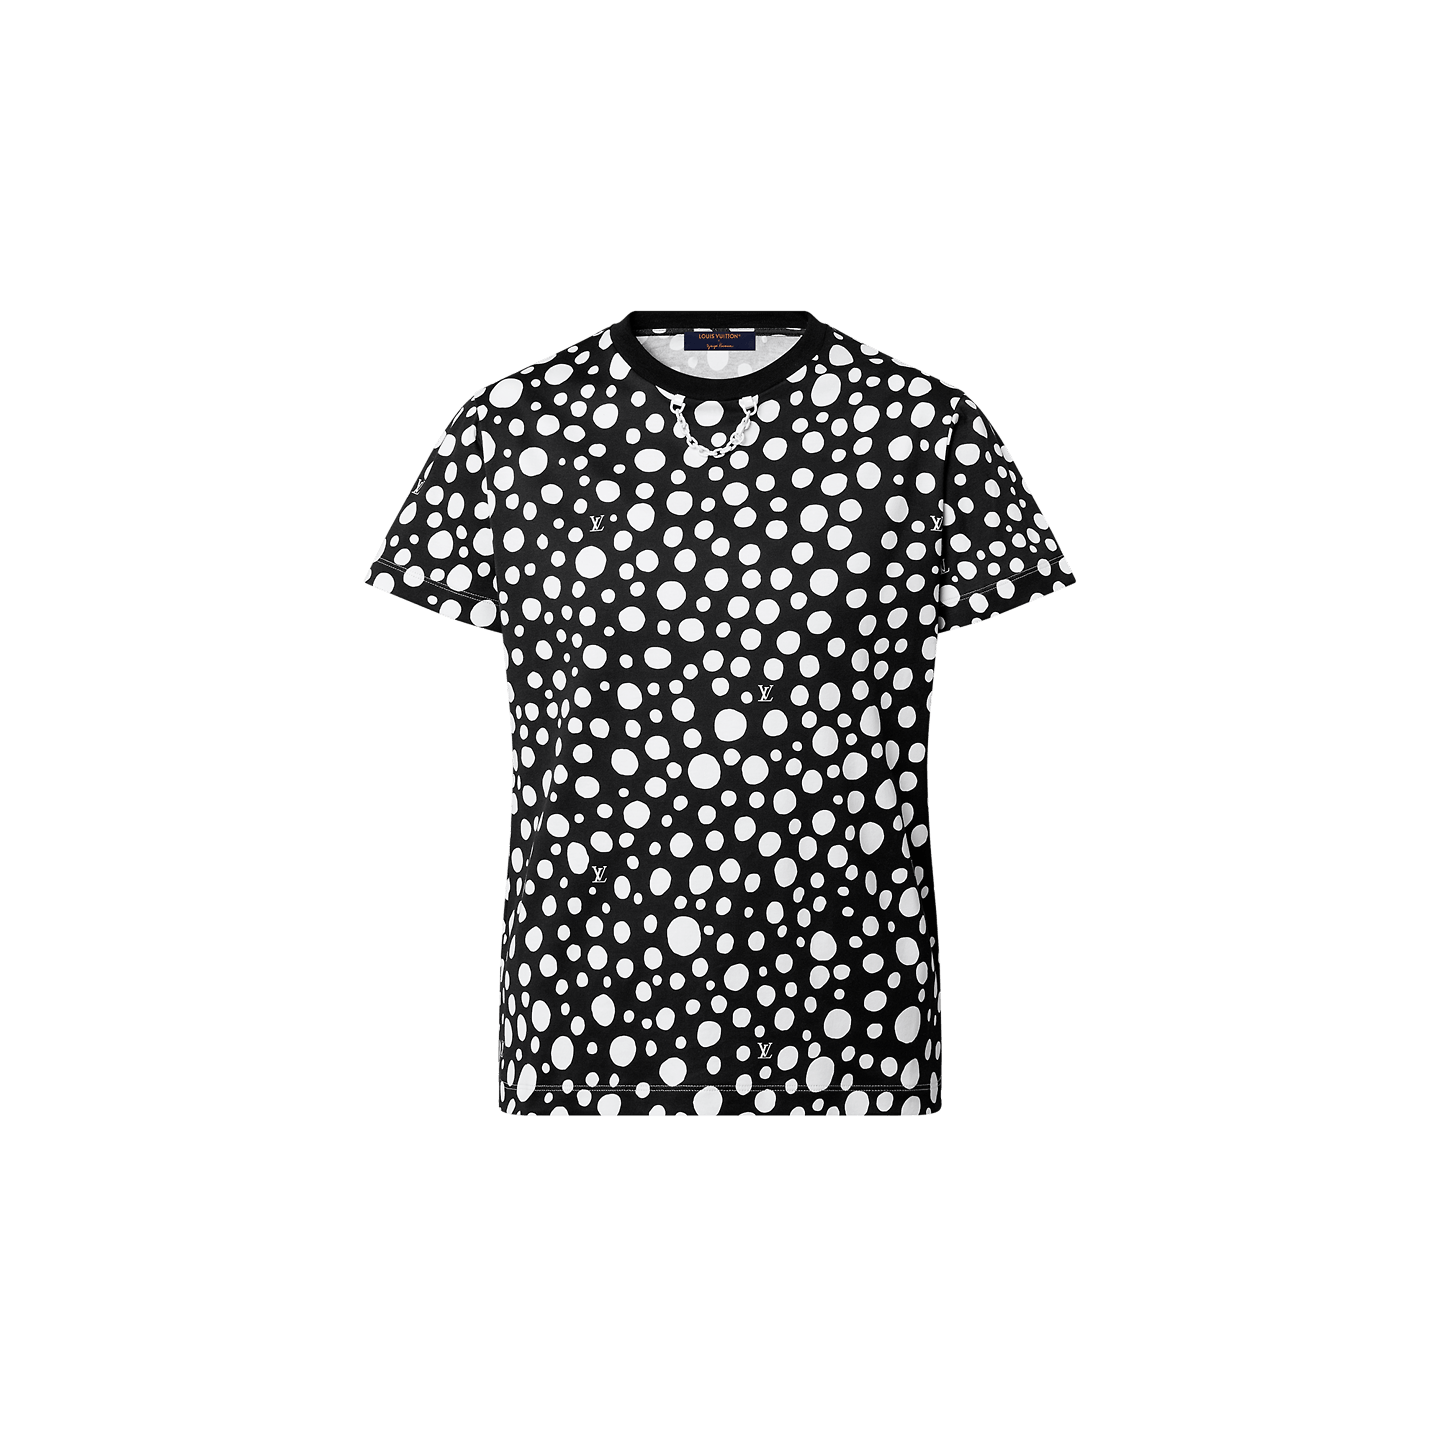 LOUIS VUITTON Short-Sleeved T-shirt XS Black HGY13WFMB LV Auth